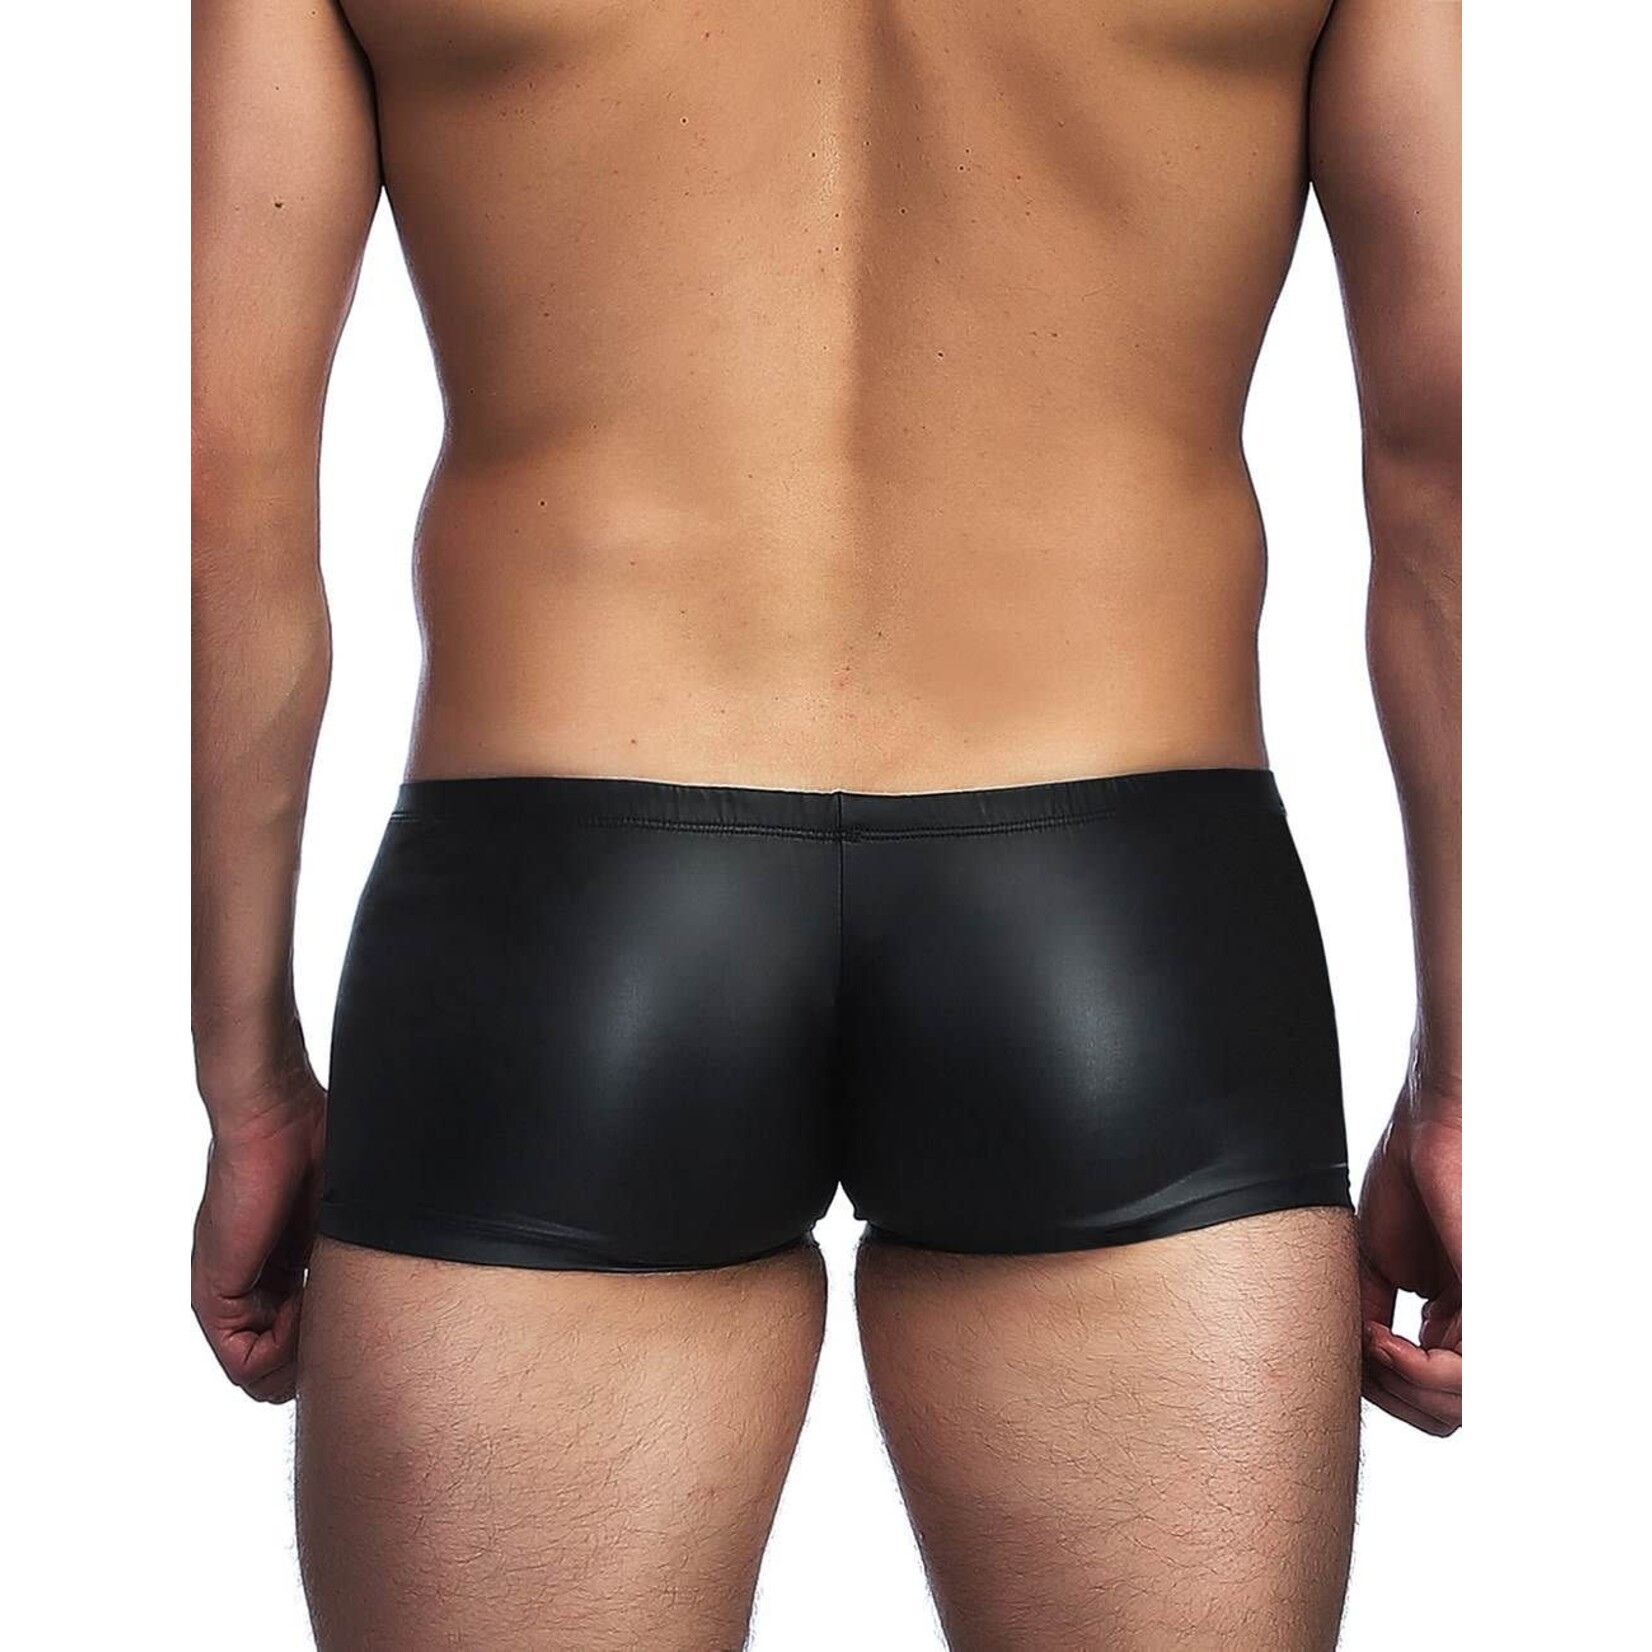 OH YEAH! -  BLACK LEATHER SEXY PANTY FOR MAN 5XL